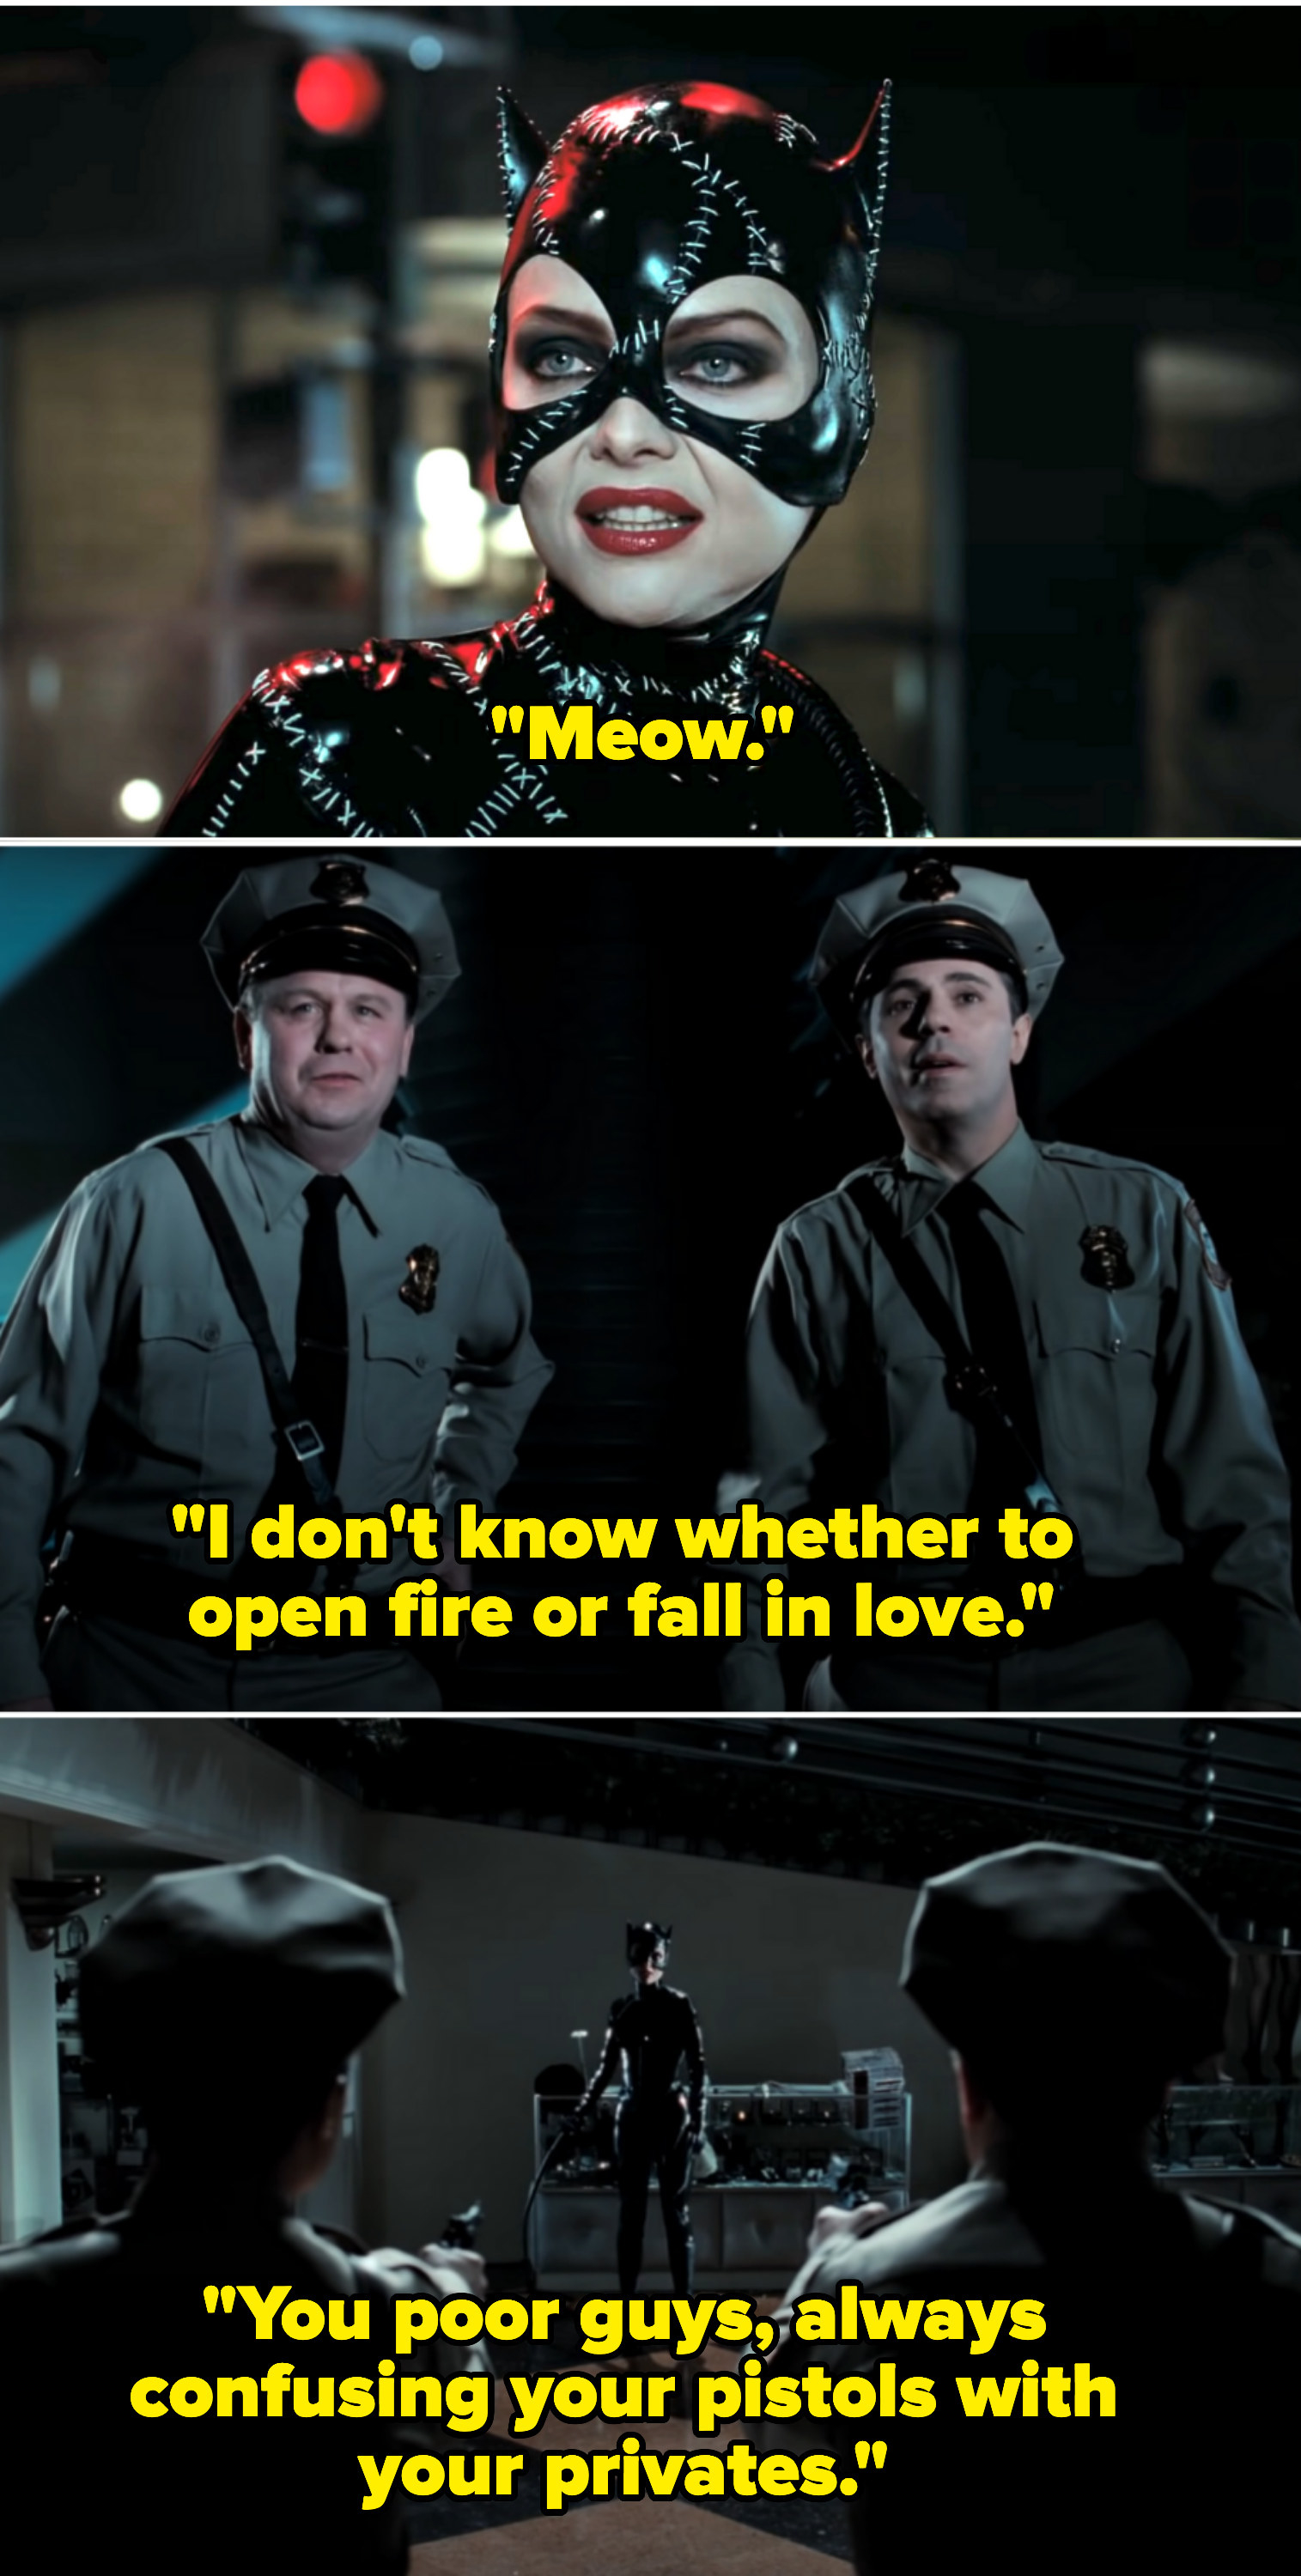 Catwoman says, &quot;Meow&quot; and cops say, &quot;I don&#x27;t know whether to open fire or fall in love&quot;